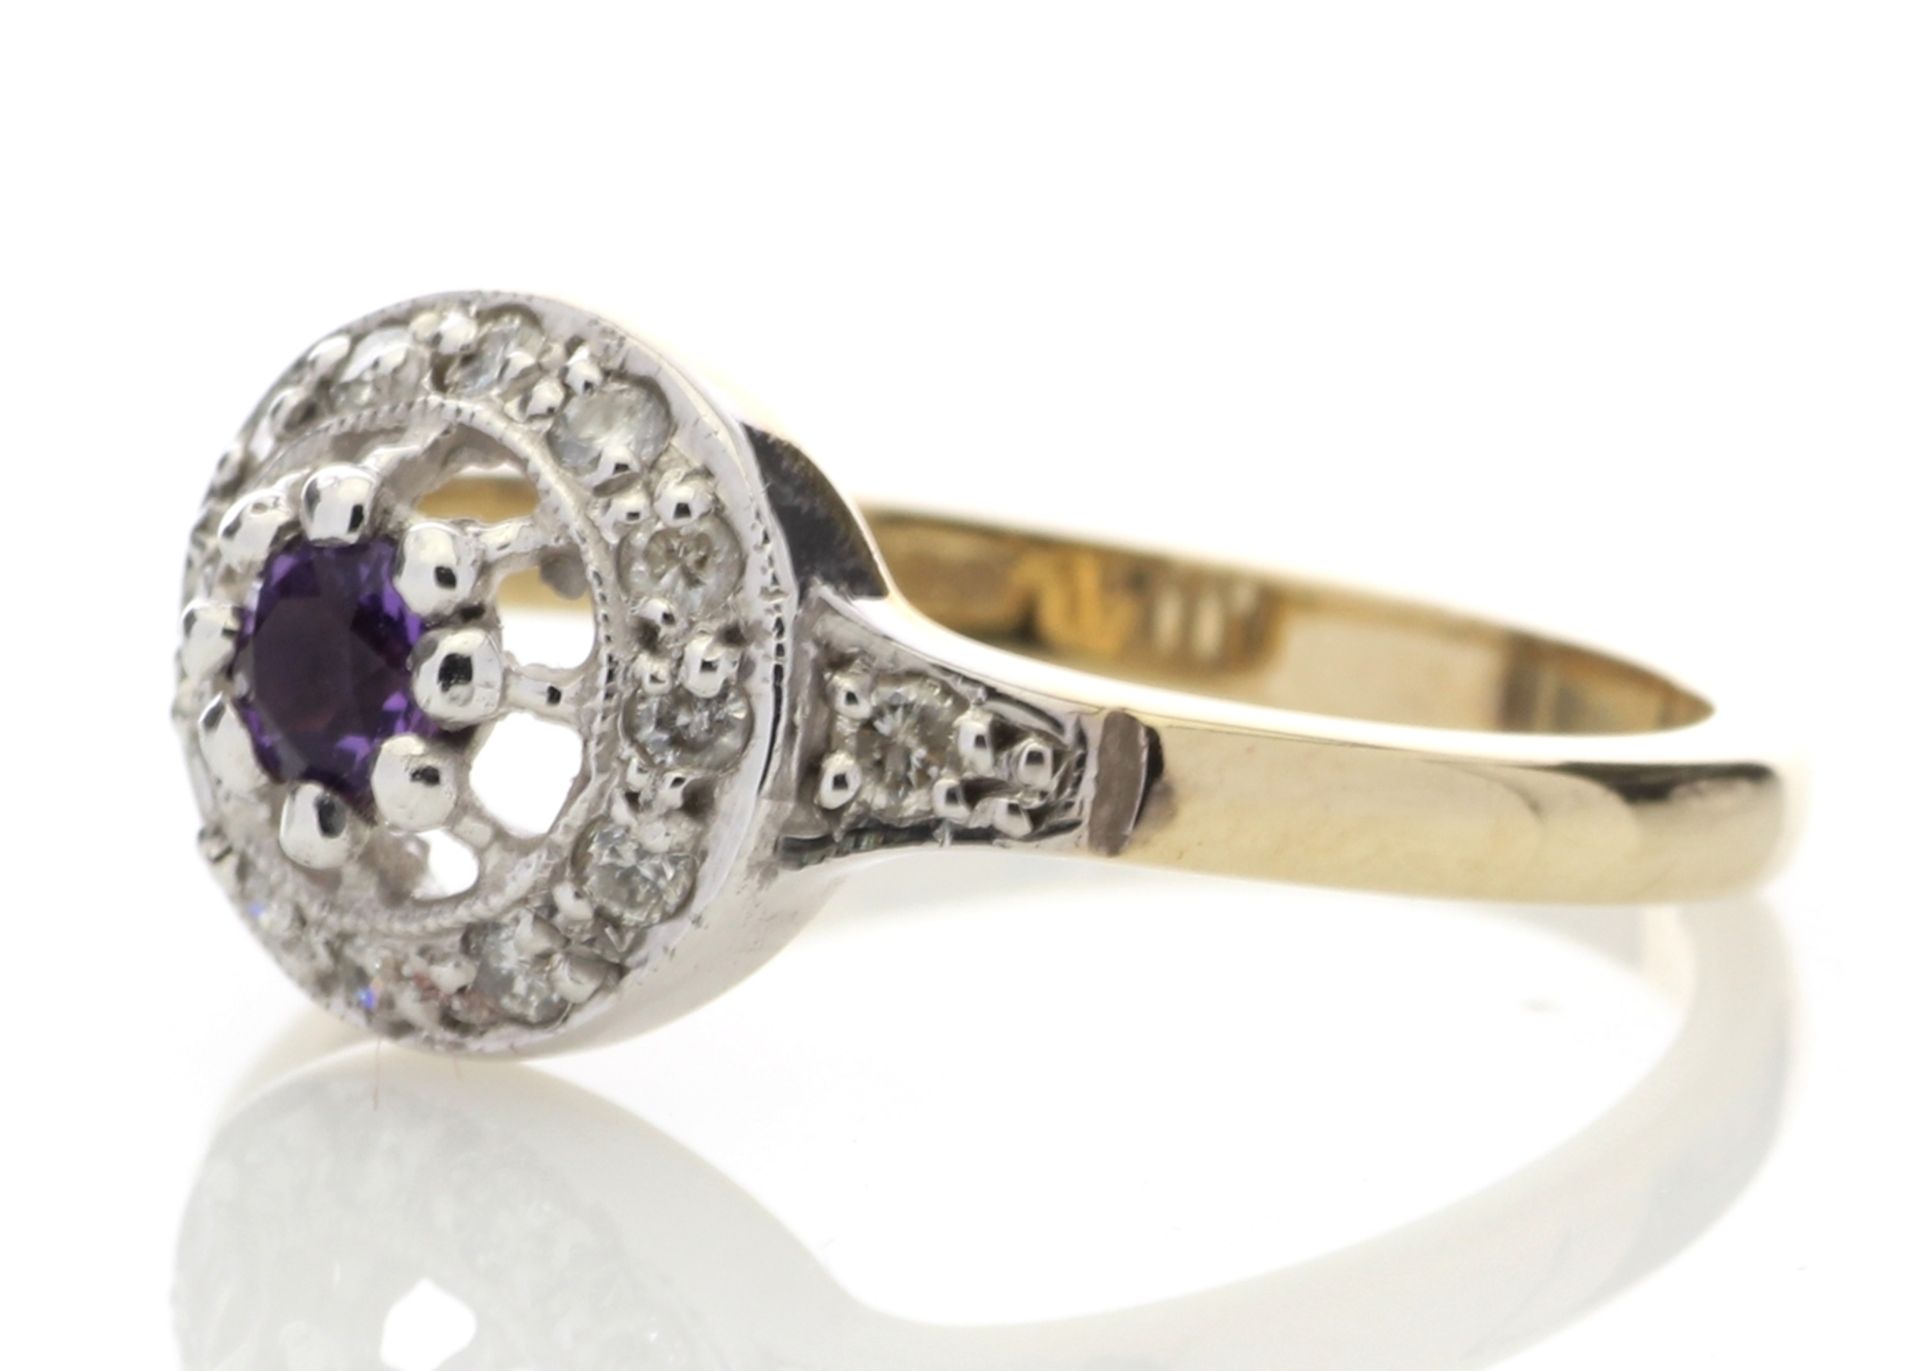 9ct Yellow Gold Round Cluster Claw Set Diamond Amethyst Ring 0.21 Carats - Valued by AGI £1,053.00 - - Image 2 of 4